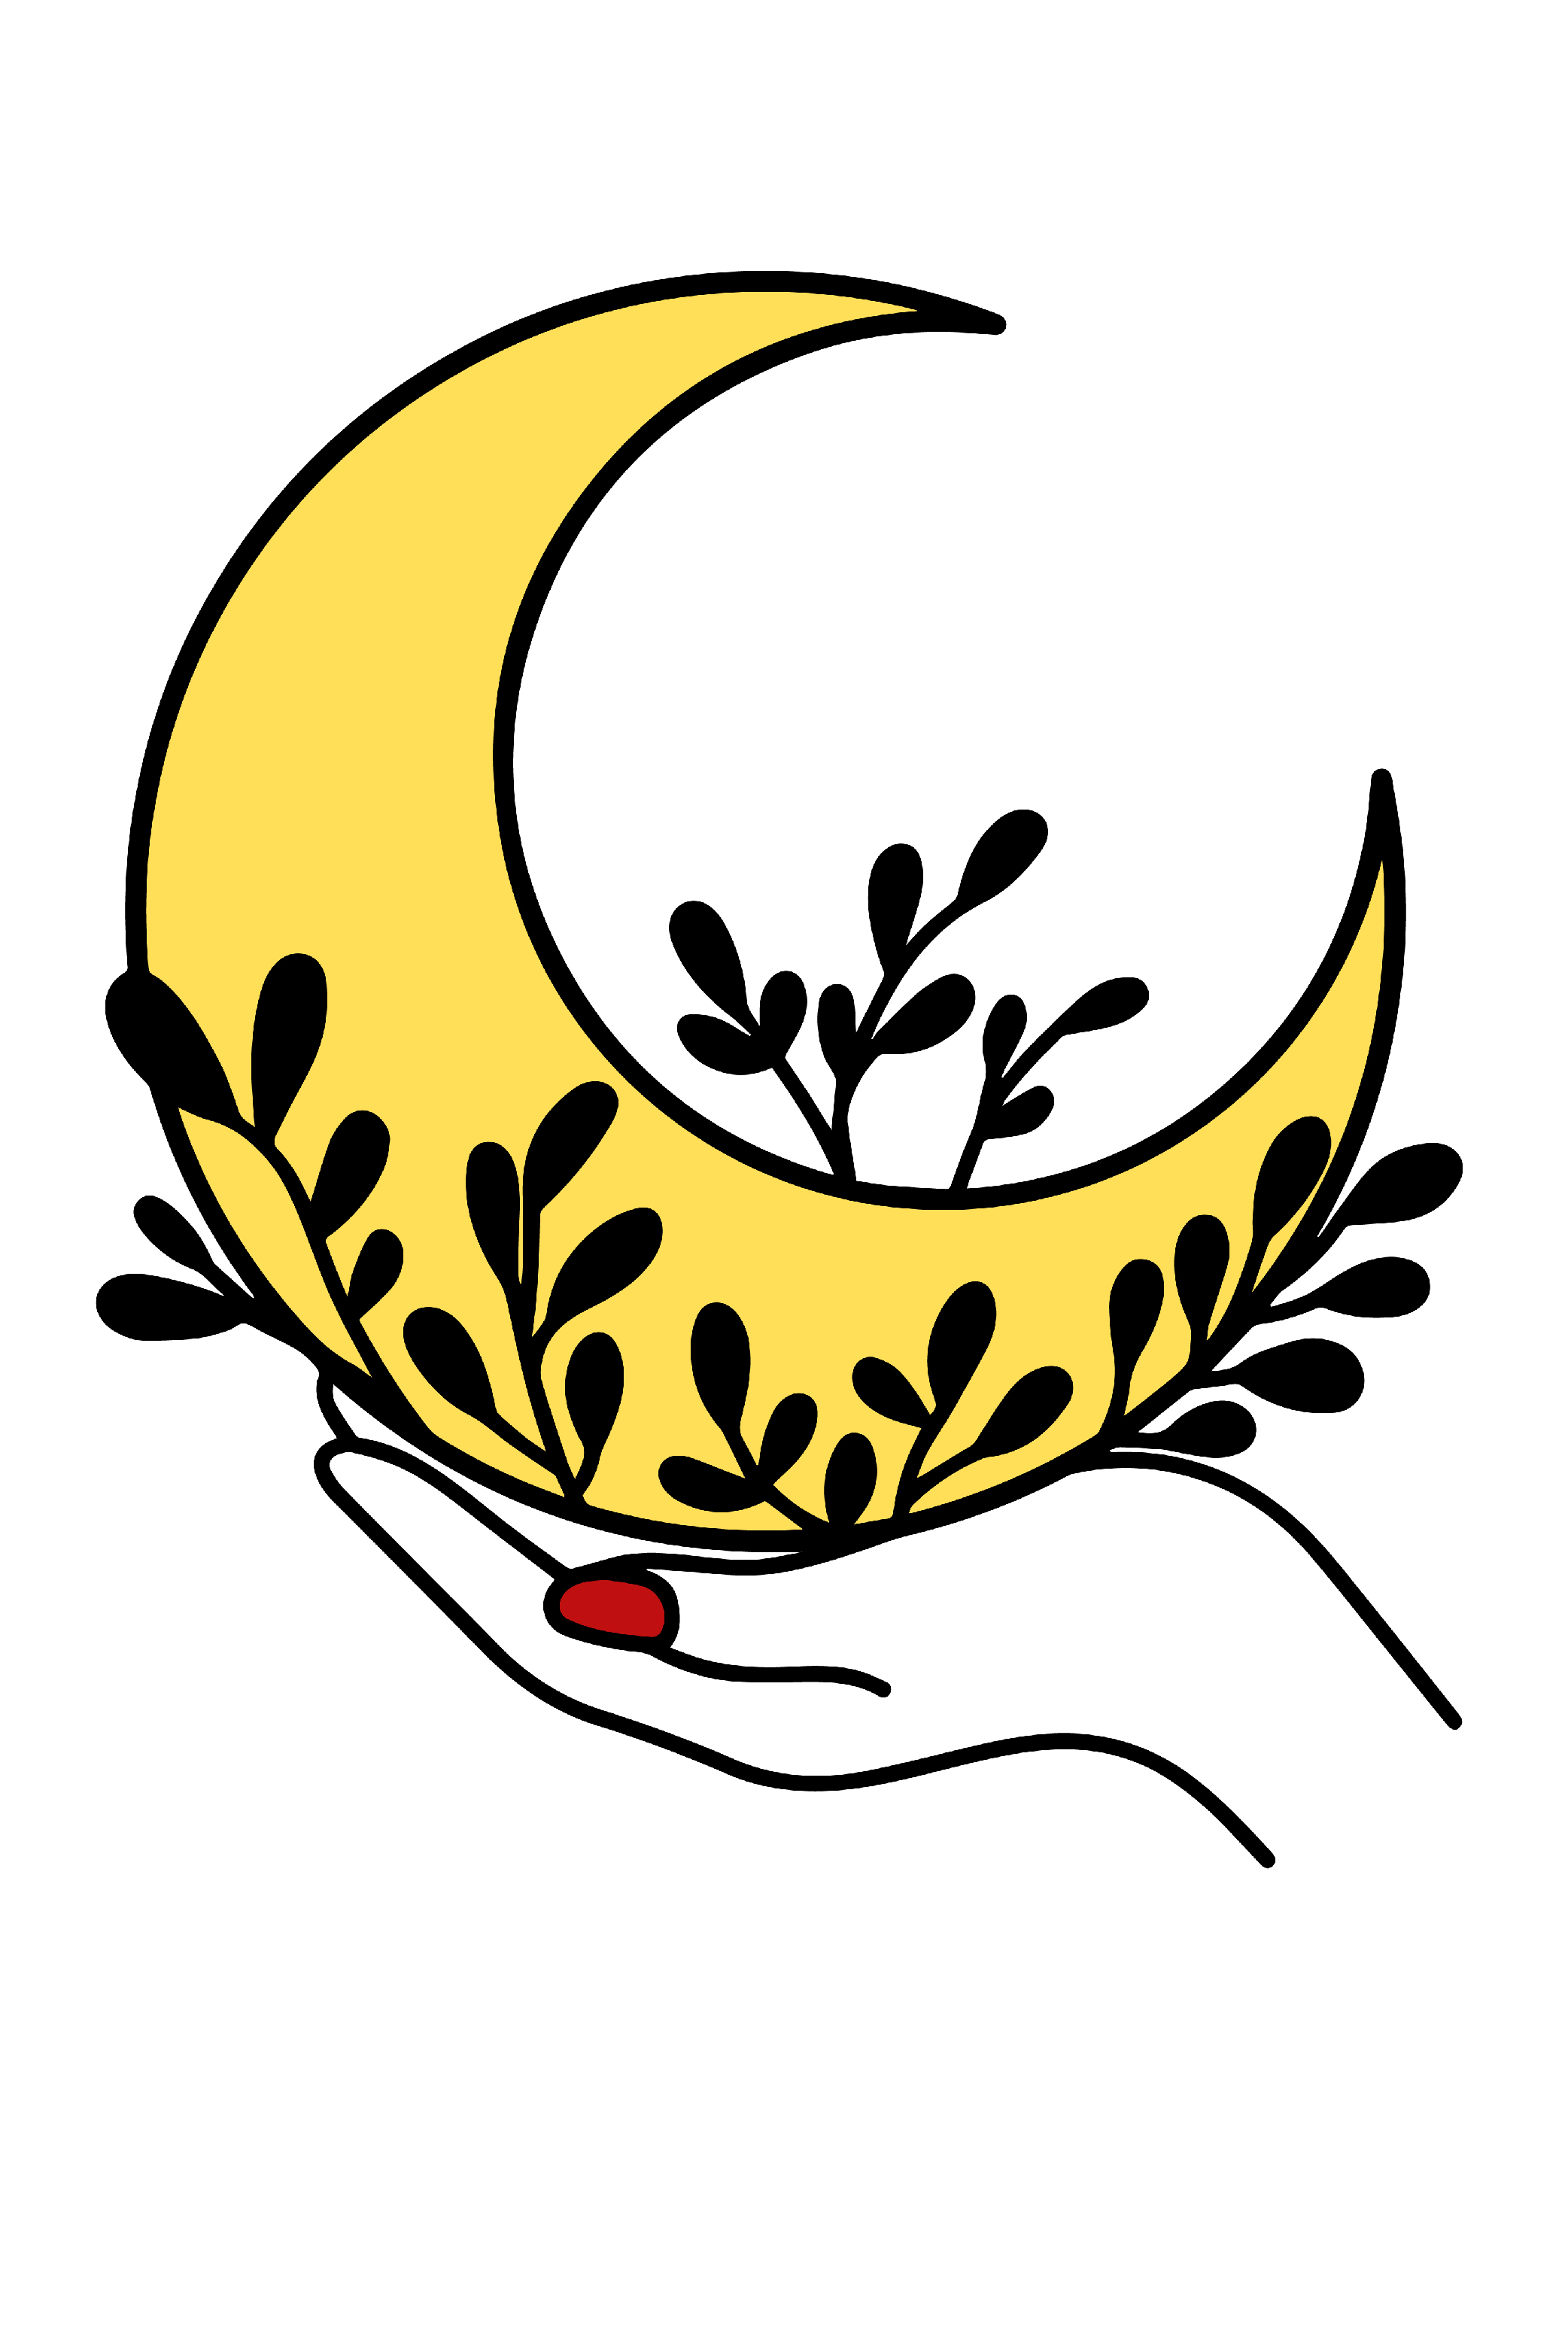 Moon In Hand - Design ( SVG - PNG - JPG - EPS ) Included pinterest preview image.